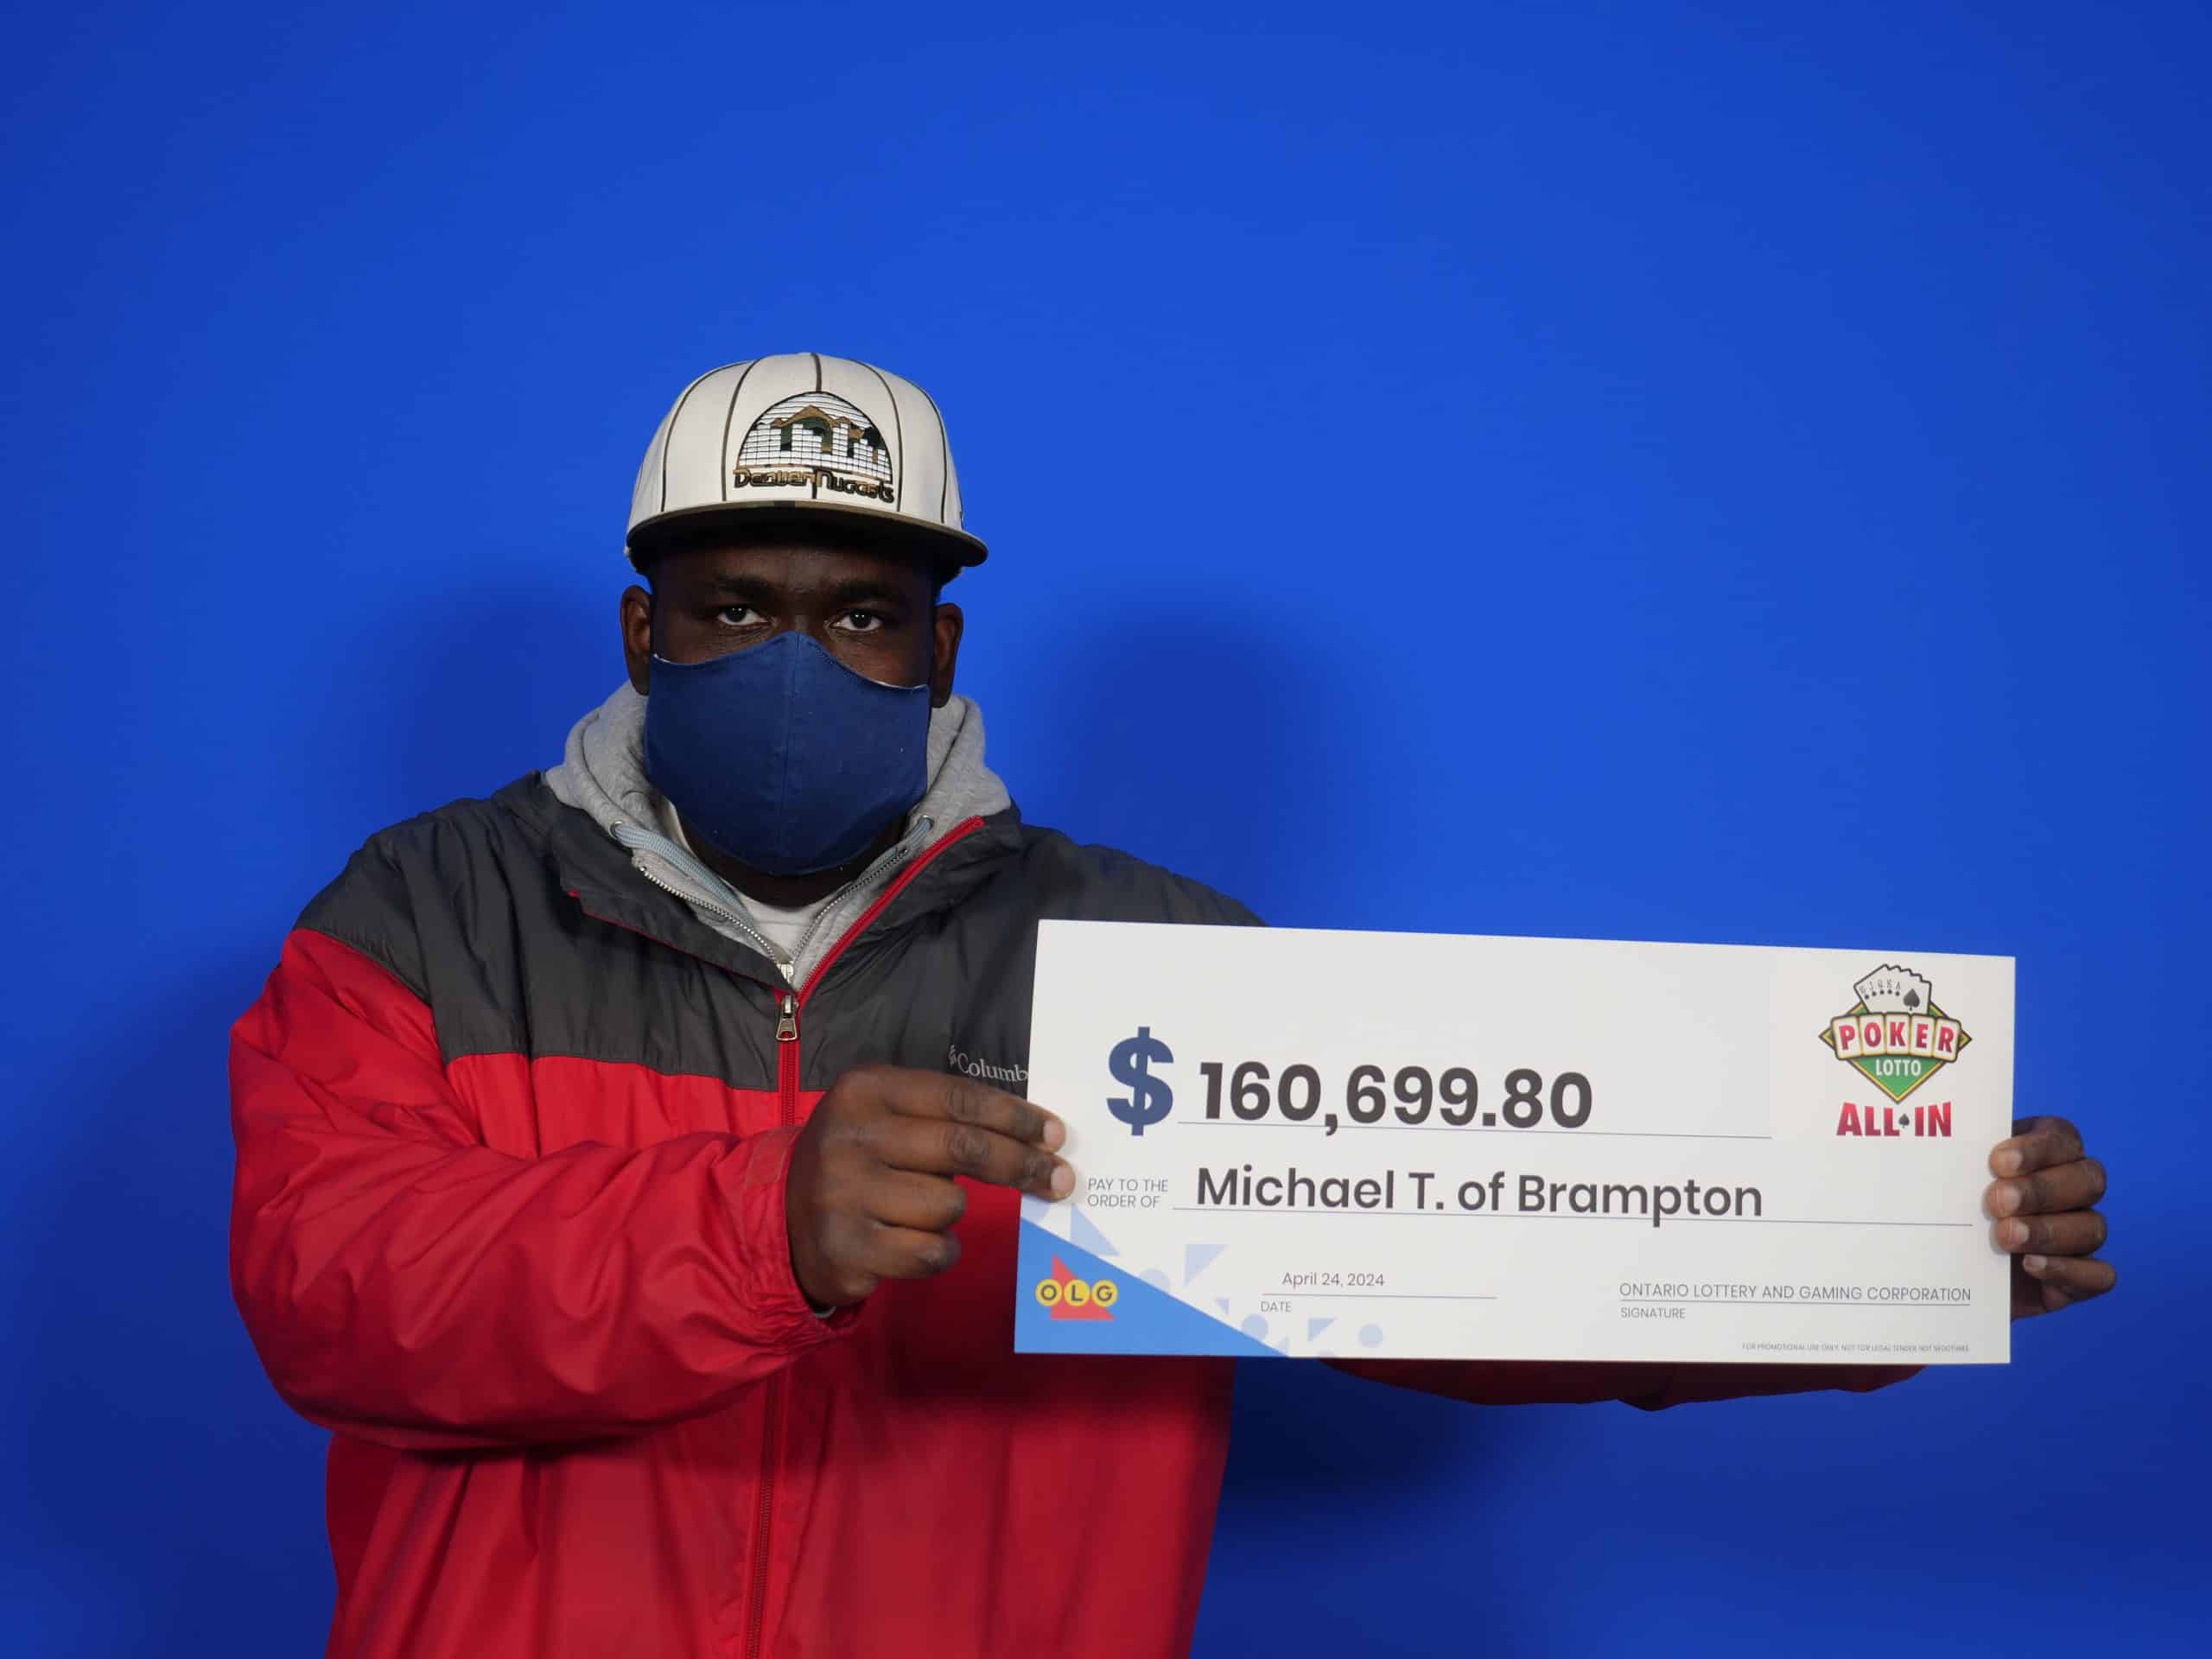 Poker player goes ‘all in’ with 2 lottery wins worth more than $160,000 in Brampton